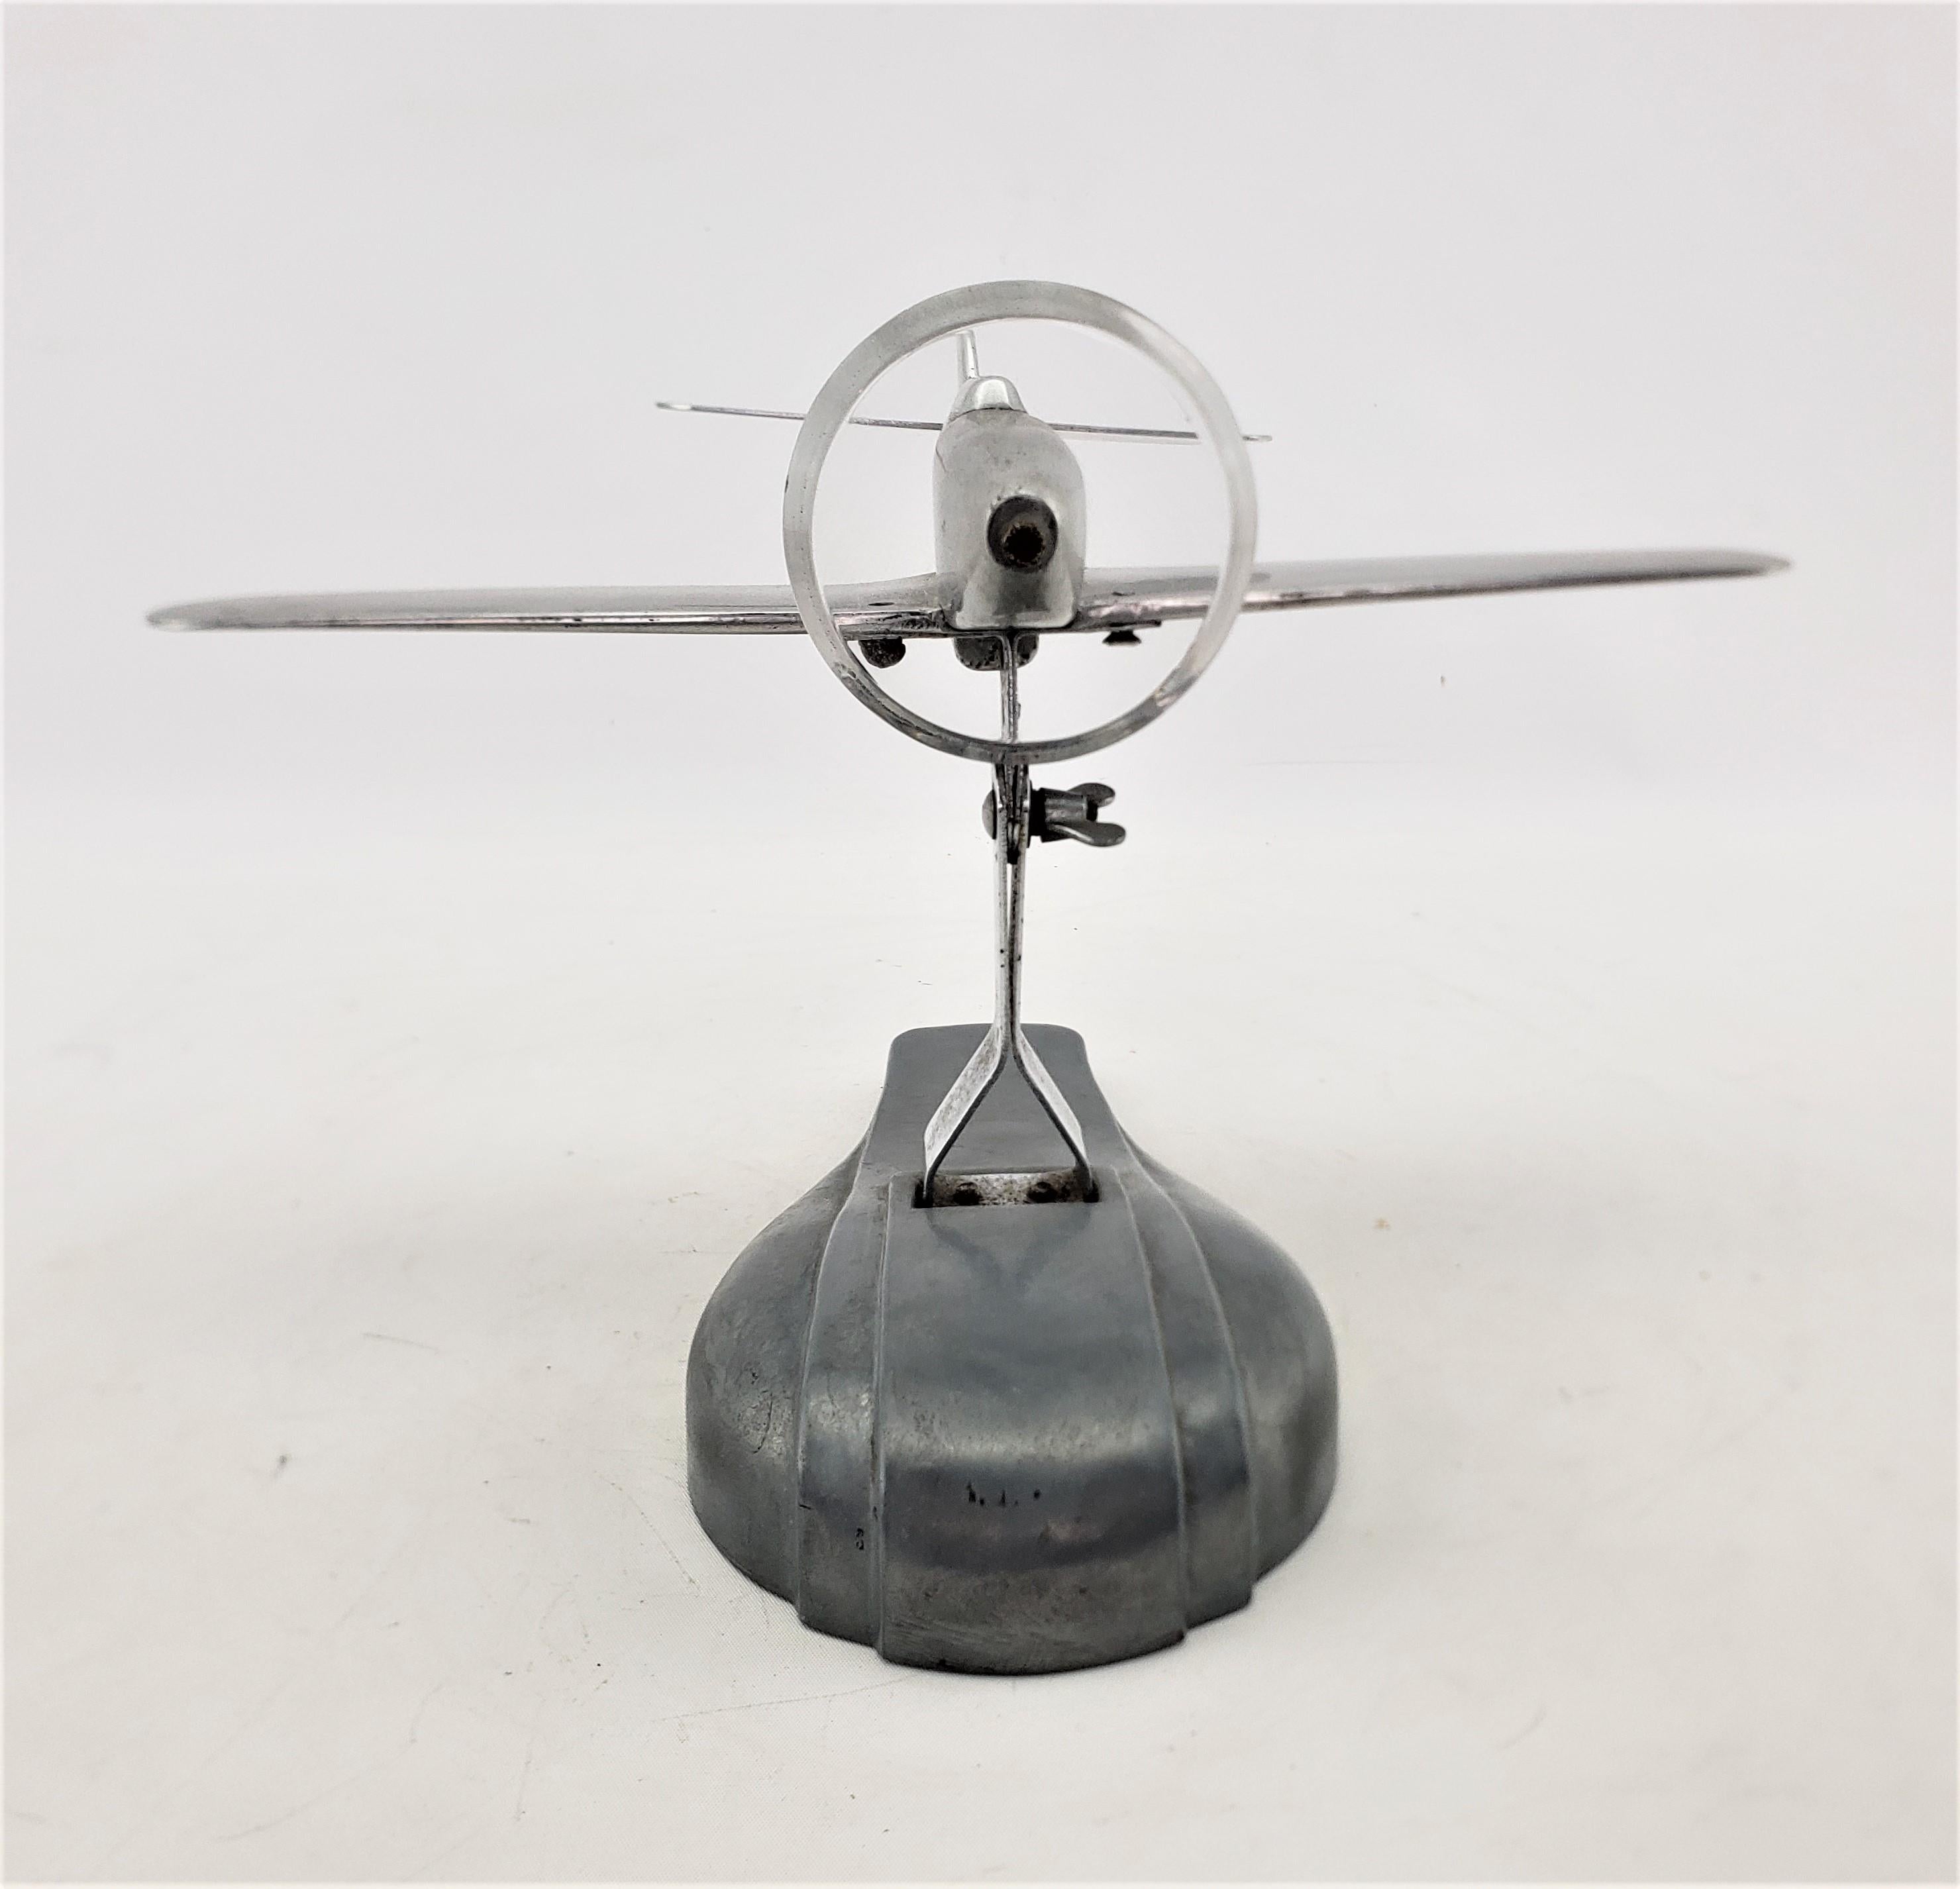 Metal Mid-Century Modern Cast Aluminum Stylized Airplane Model or Sculpture & Stand For Sale